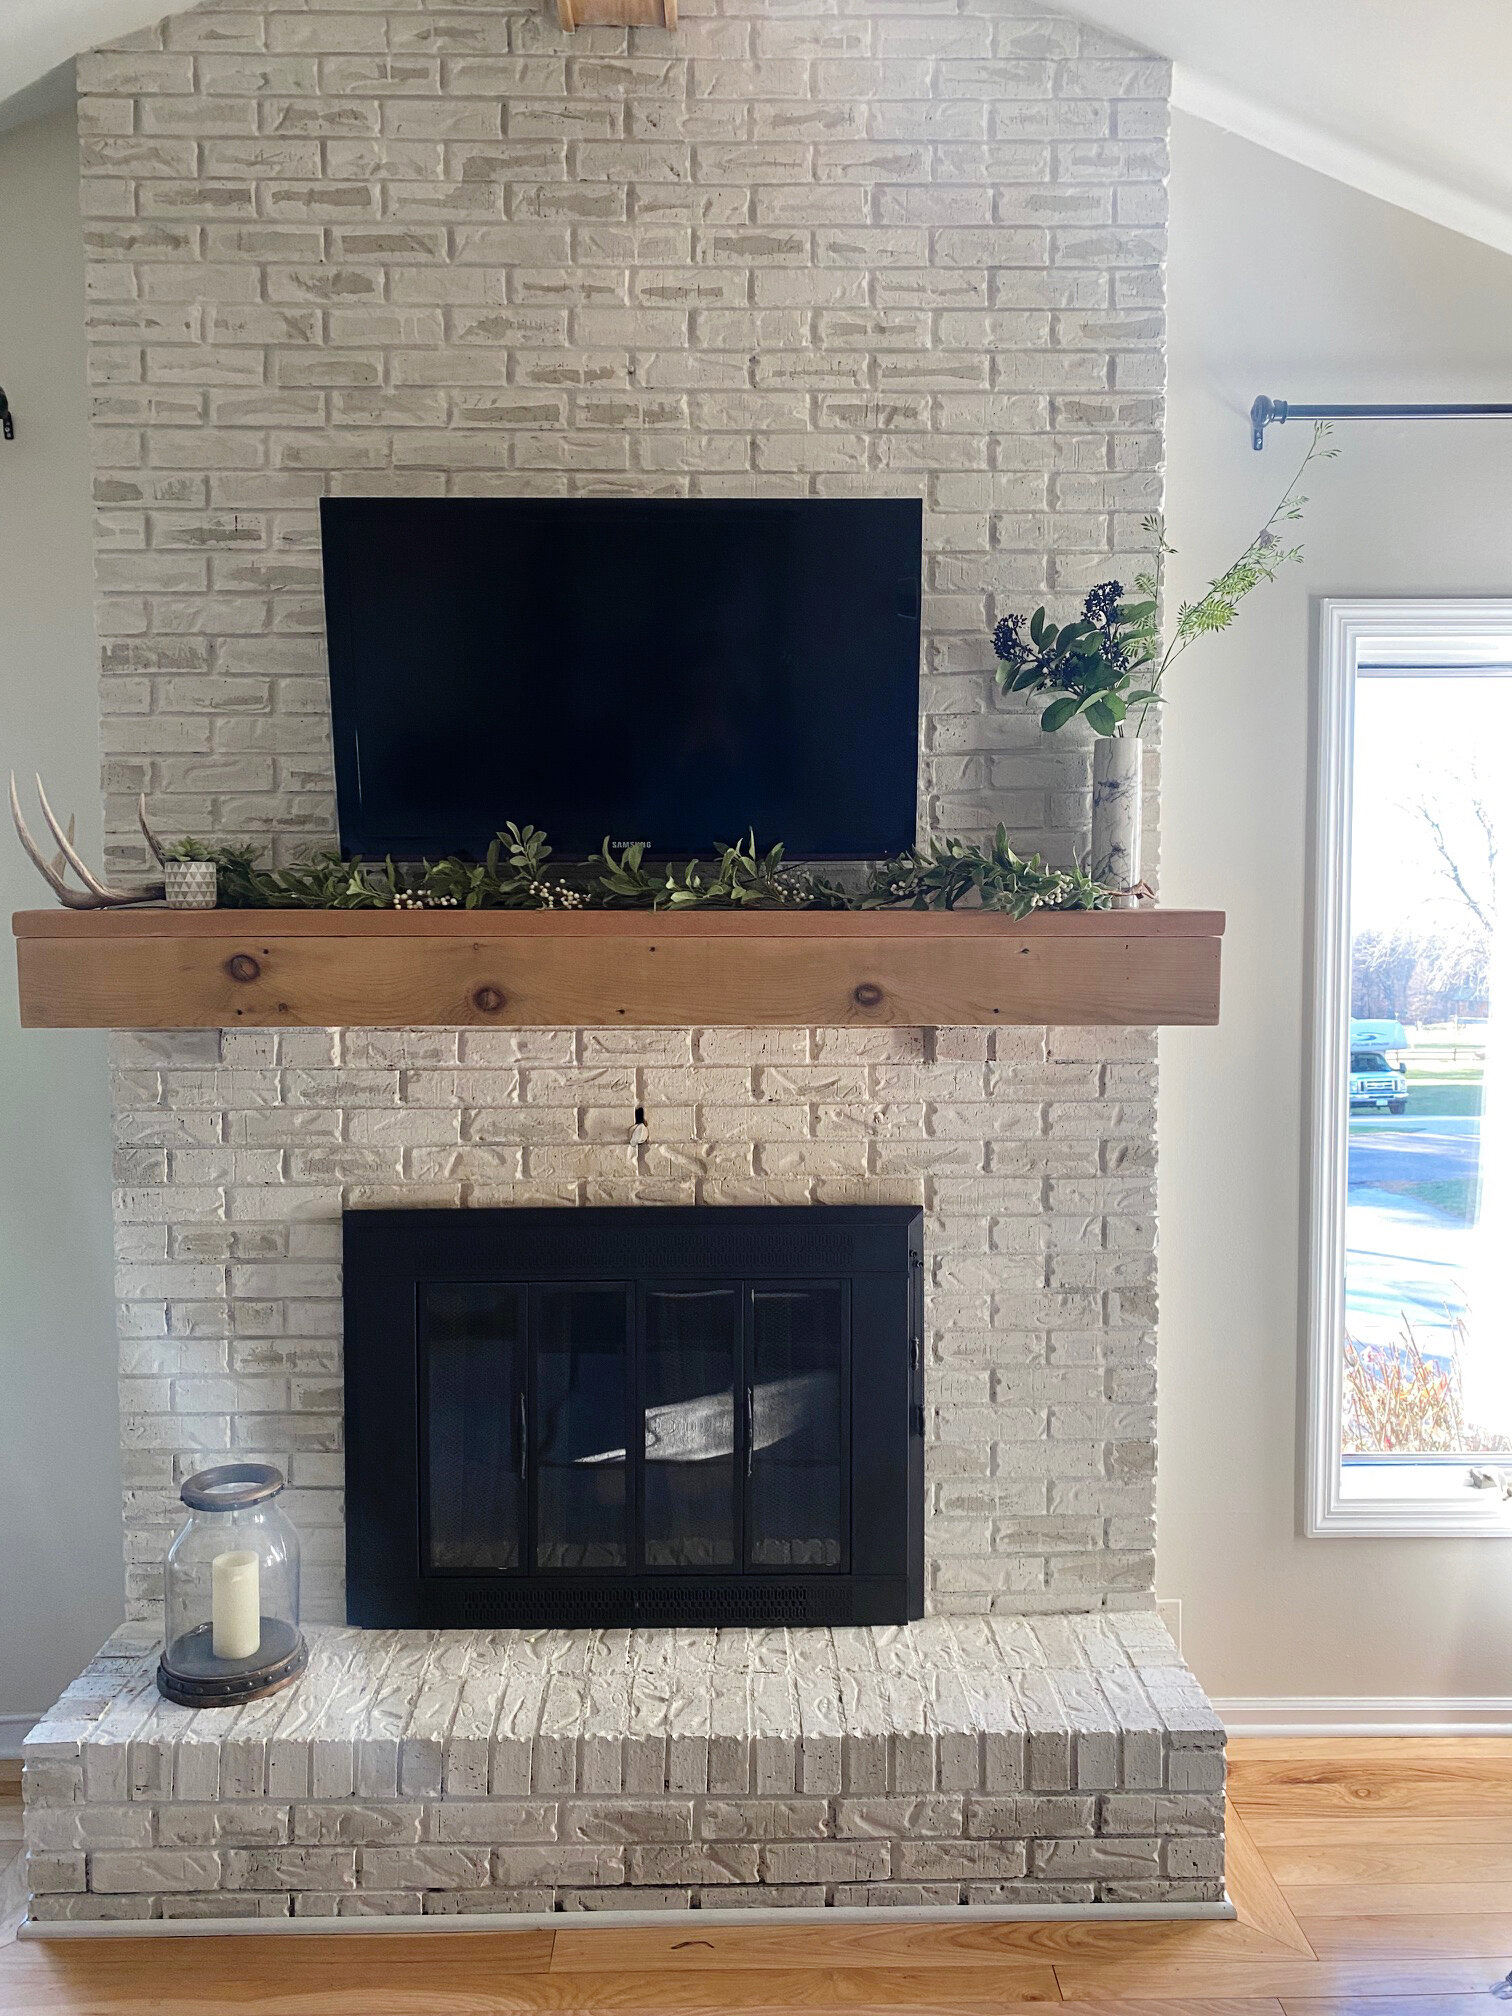 My Painted Brick Fireplace Diy Tutorial, Painting Brick Fireplace White Before And After